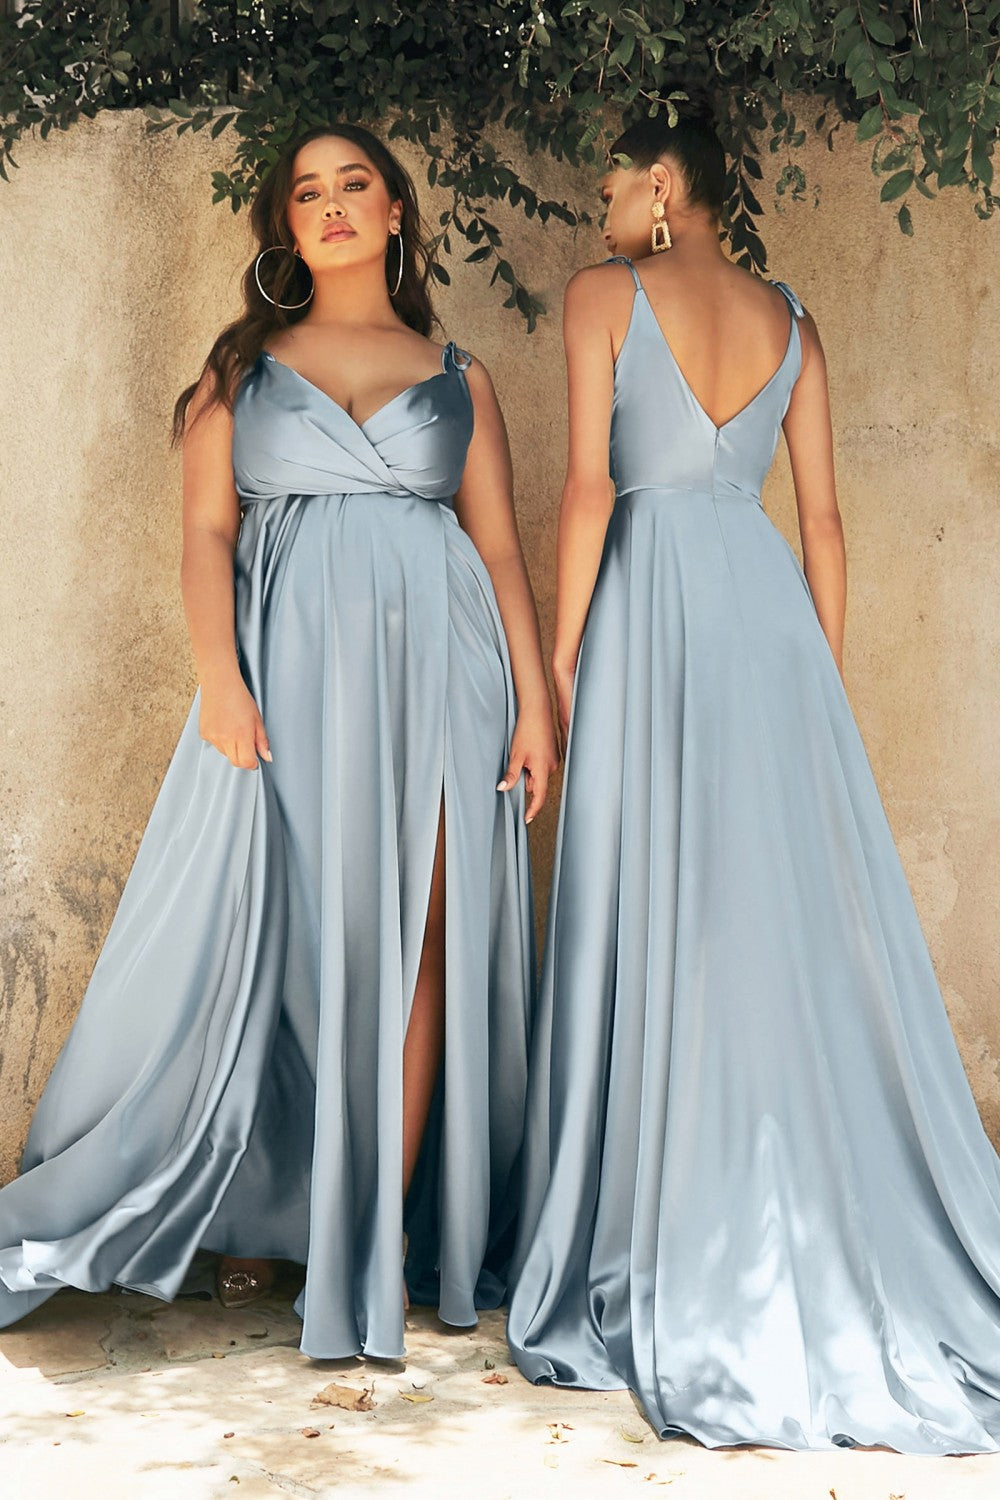 Dresses specially designed for your bridesmaids: new collection by Milla |  Milla Nova